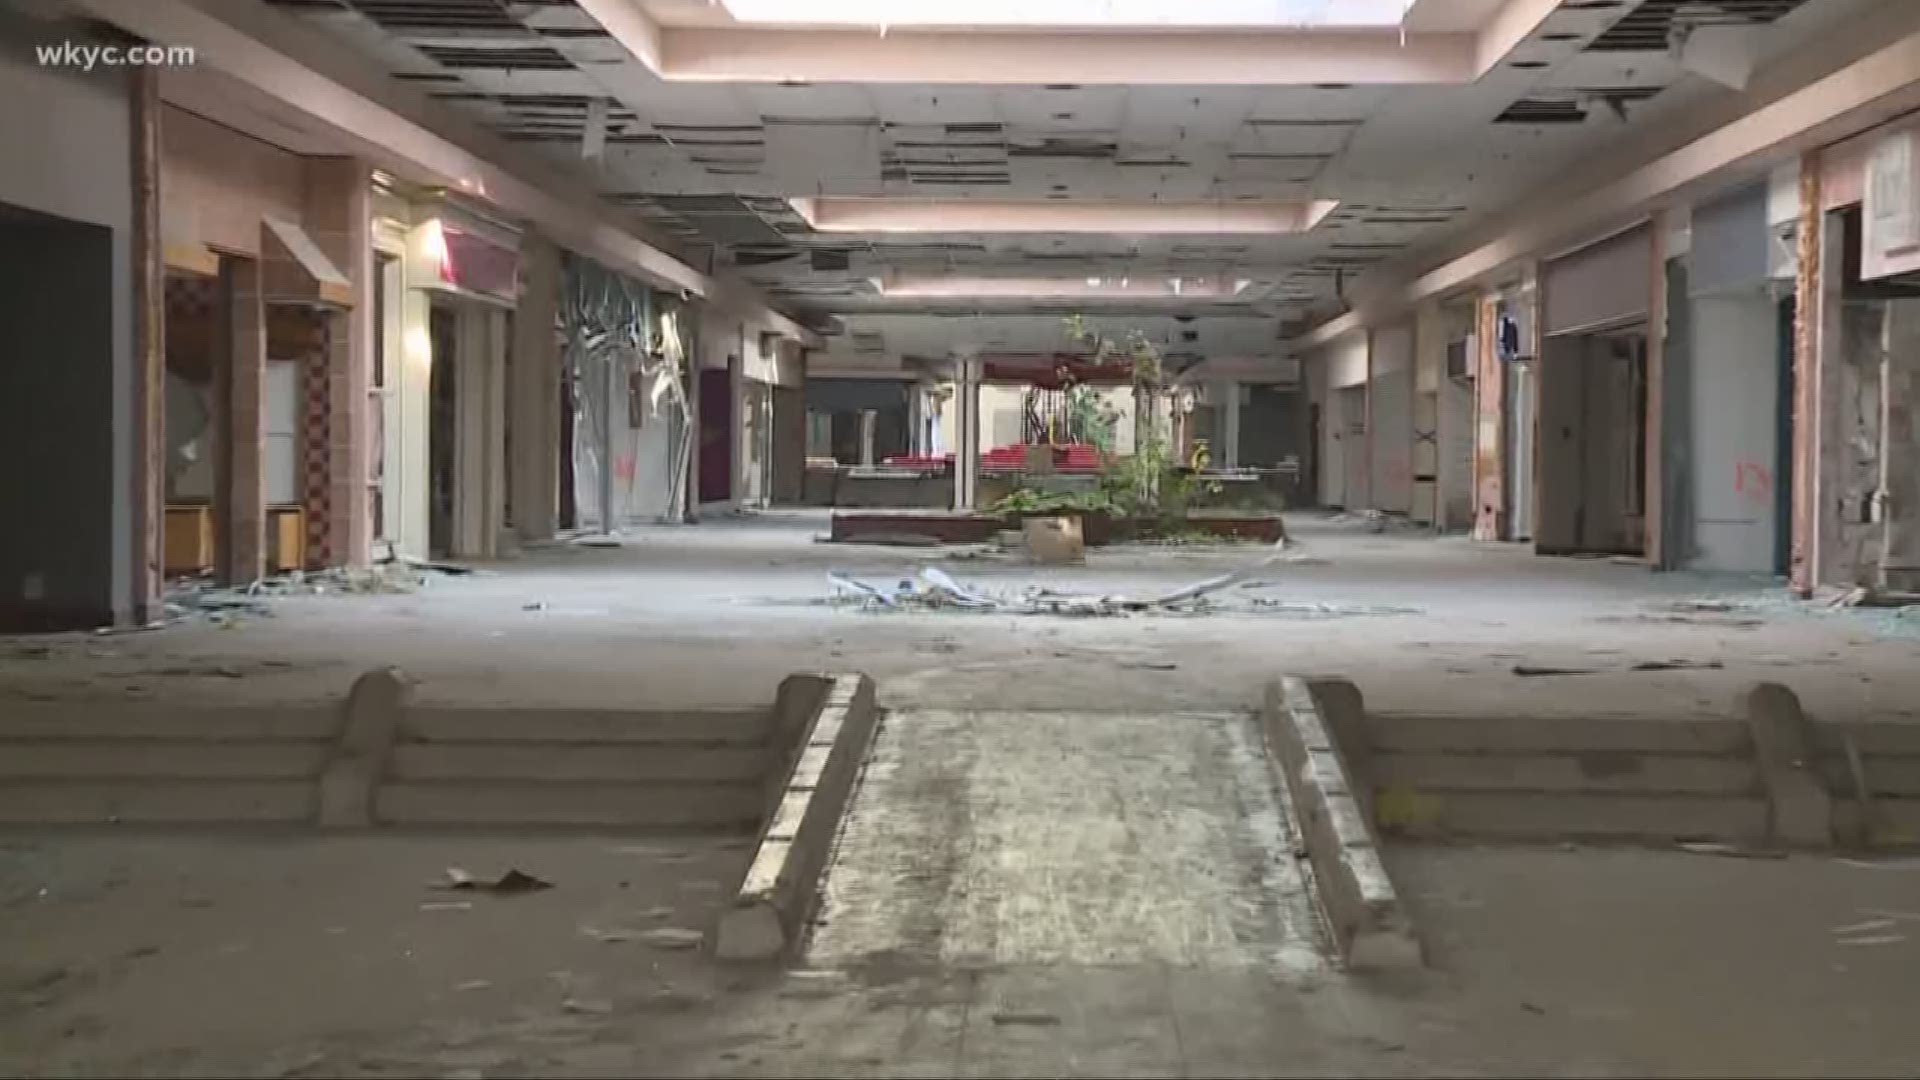 Akron moving forward to bring new life to former Rolling Acres mall